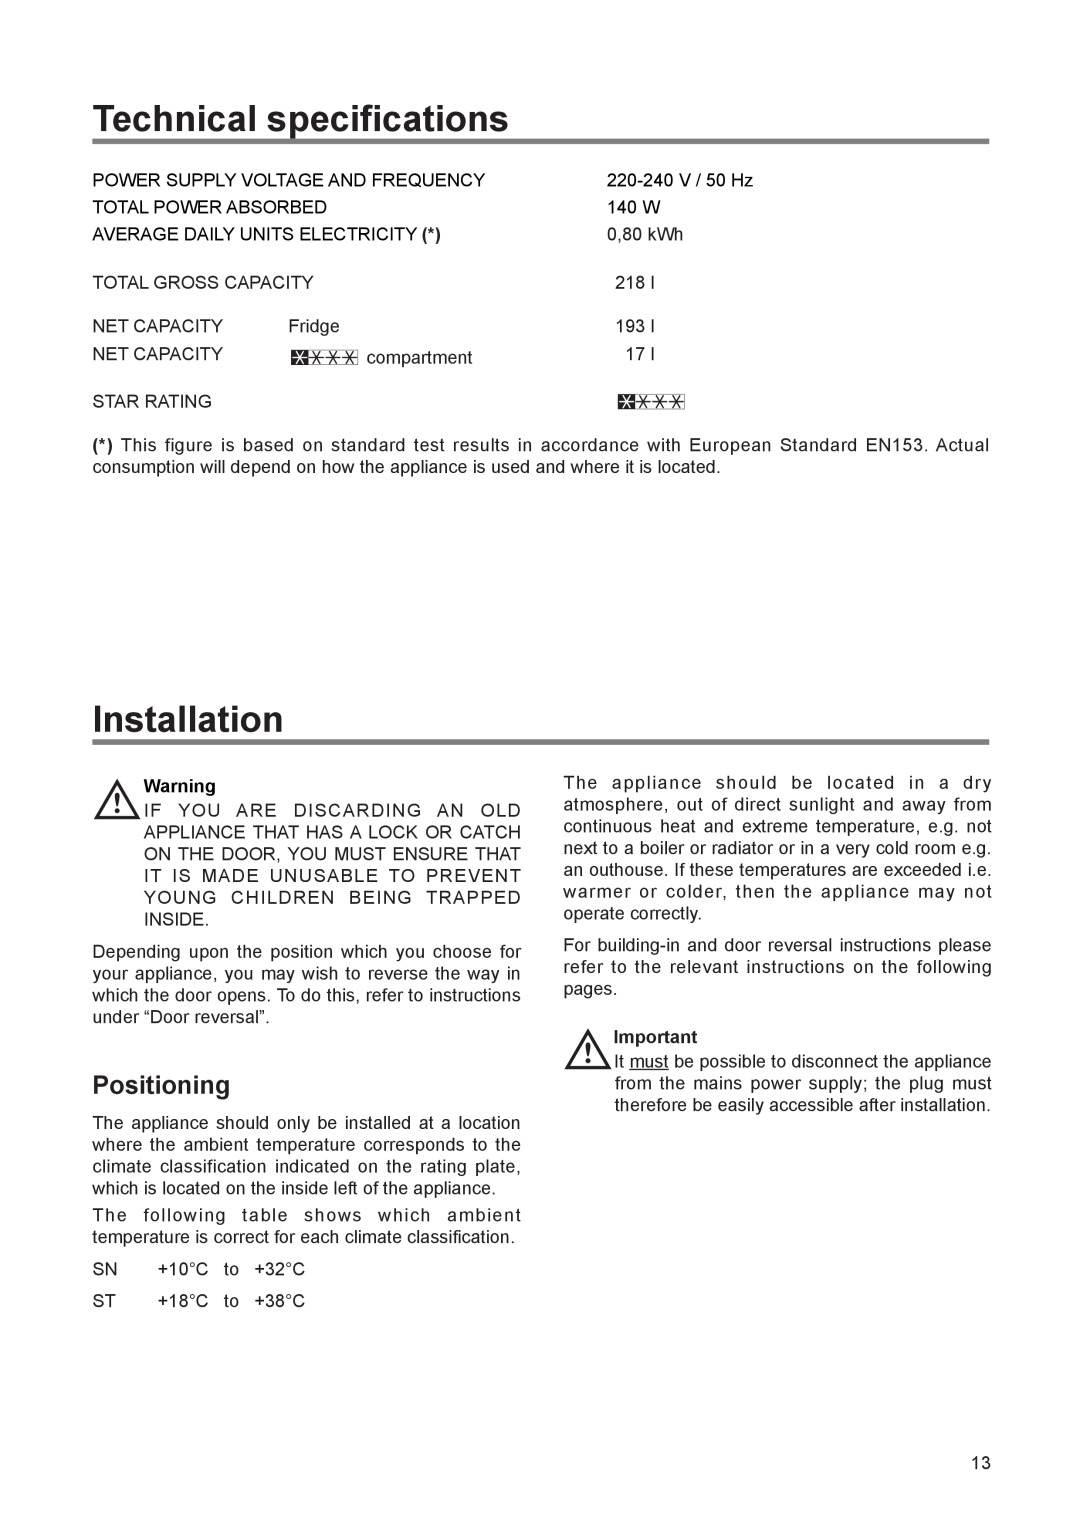 Zanussi ZI 9224 manual Technical specifications, Installation, Positioning 